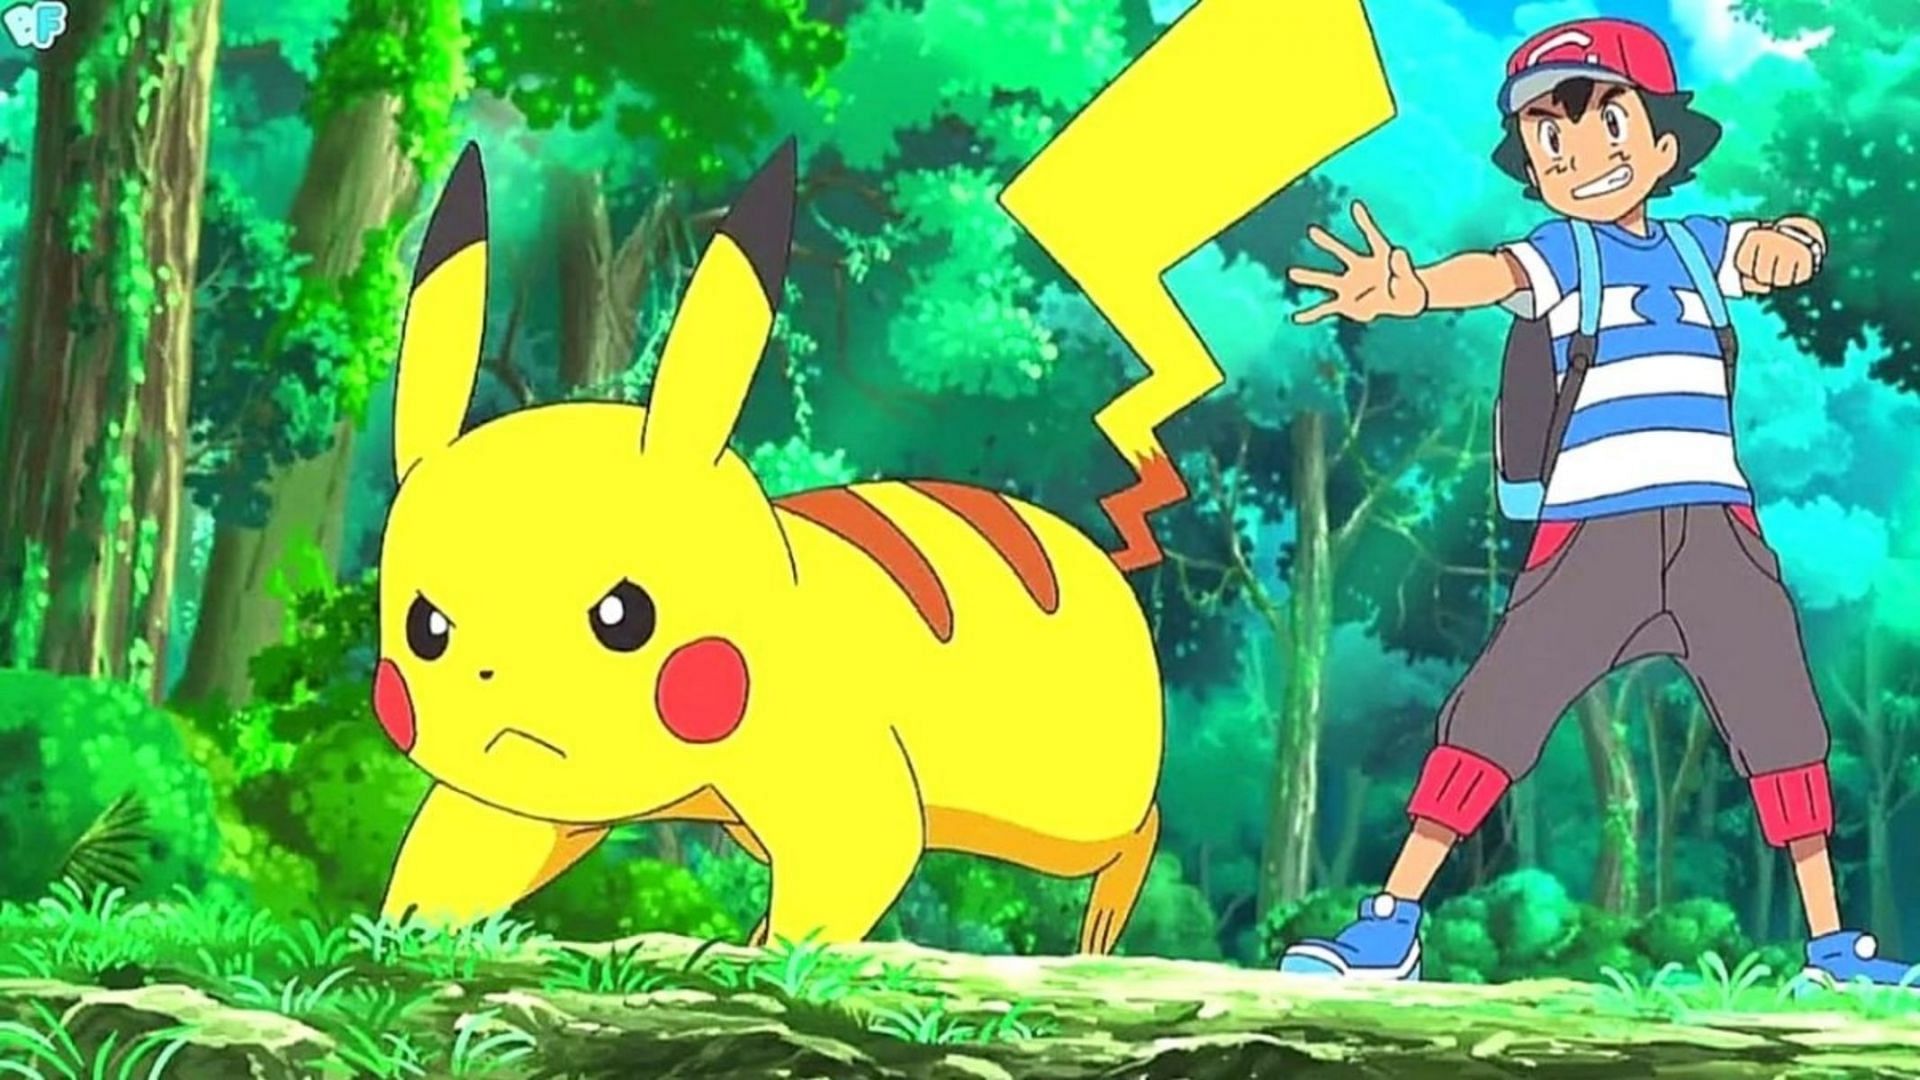 Pikachu has fought tons of battles alongside Ash in the popular anime series (Image via The Pokemon Company)